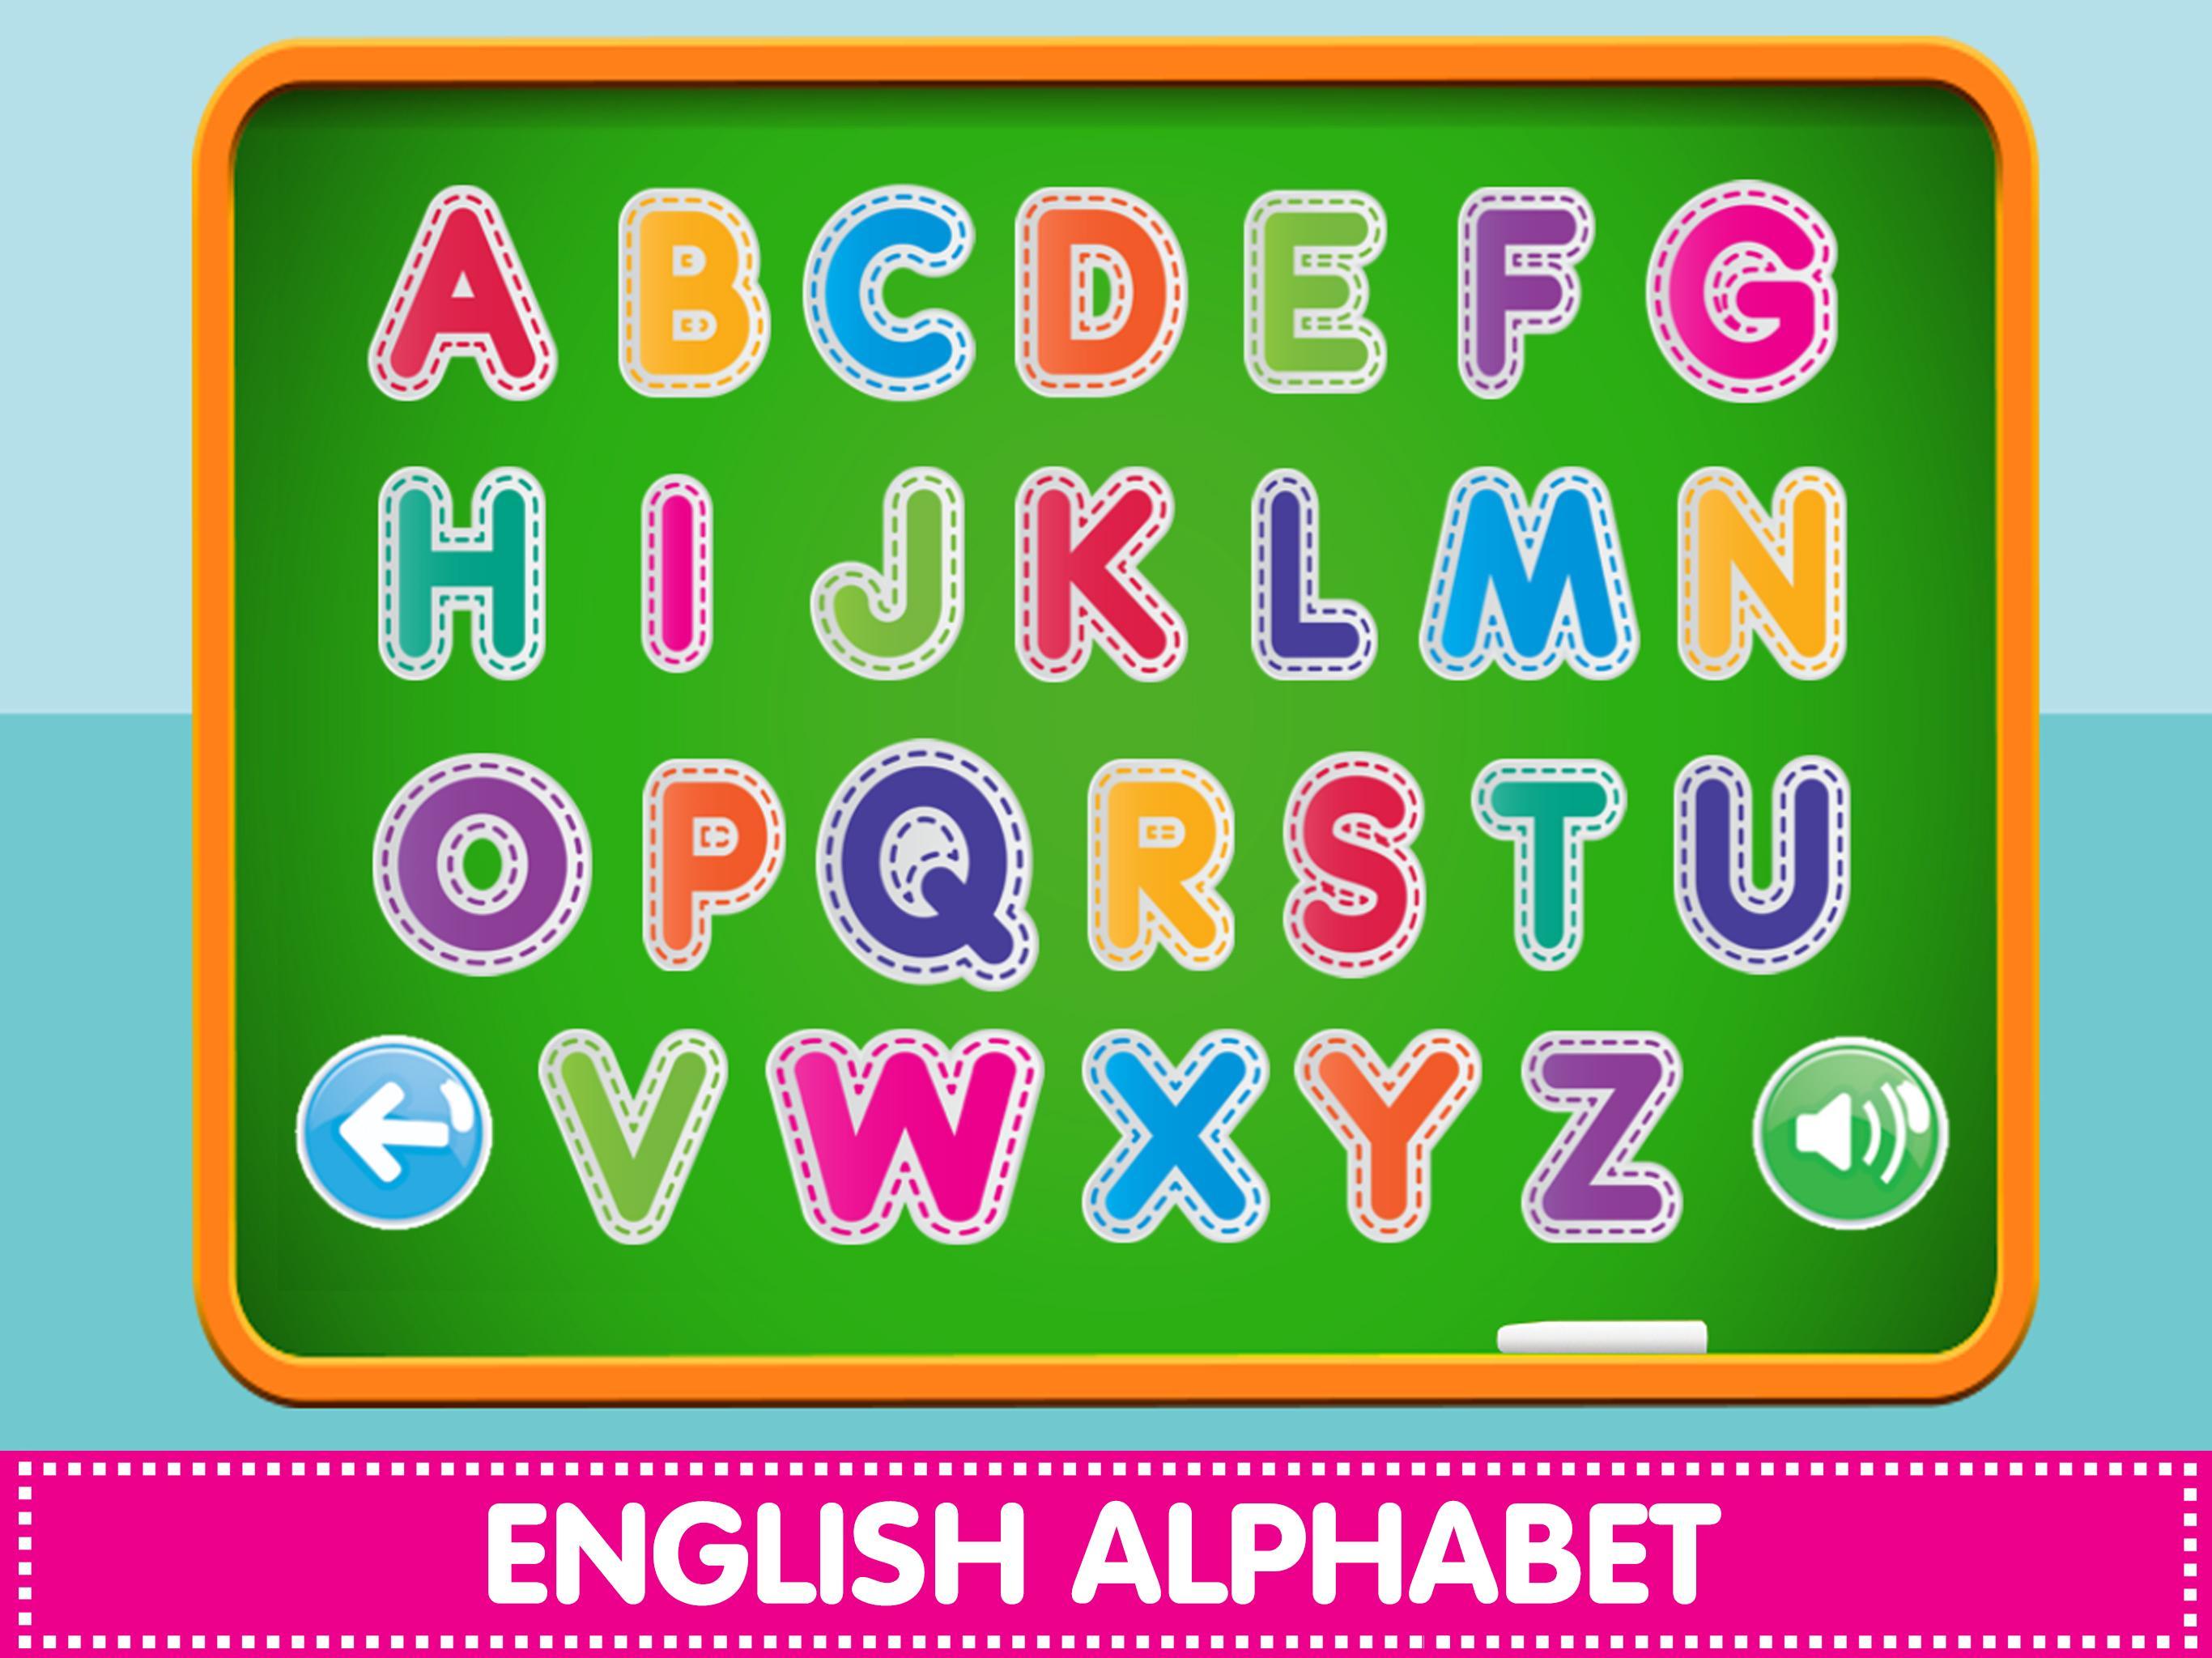 ABCD English Alphabet Writing & ABC Phonics for Android - APK Download